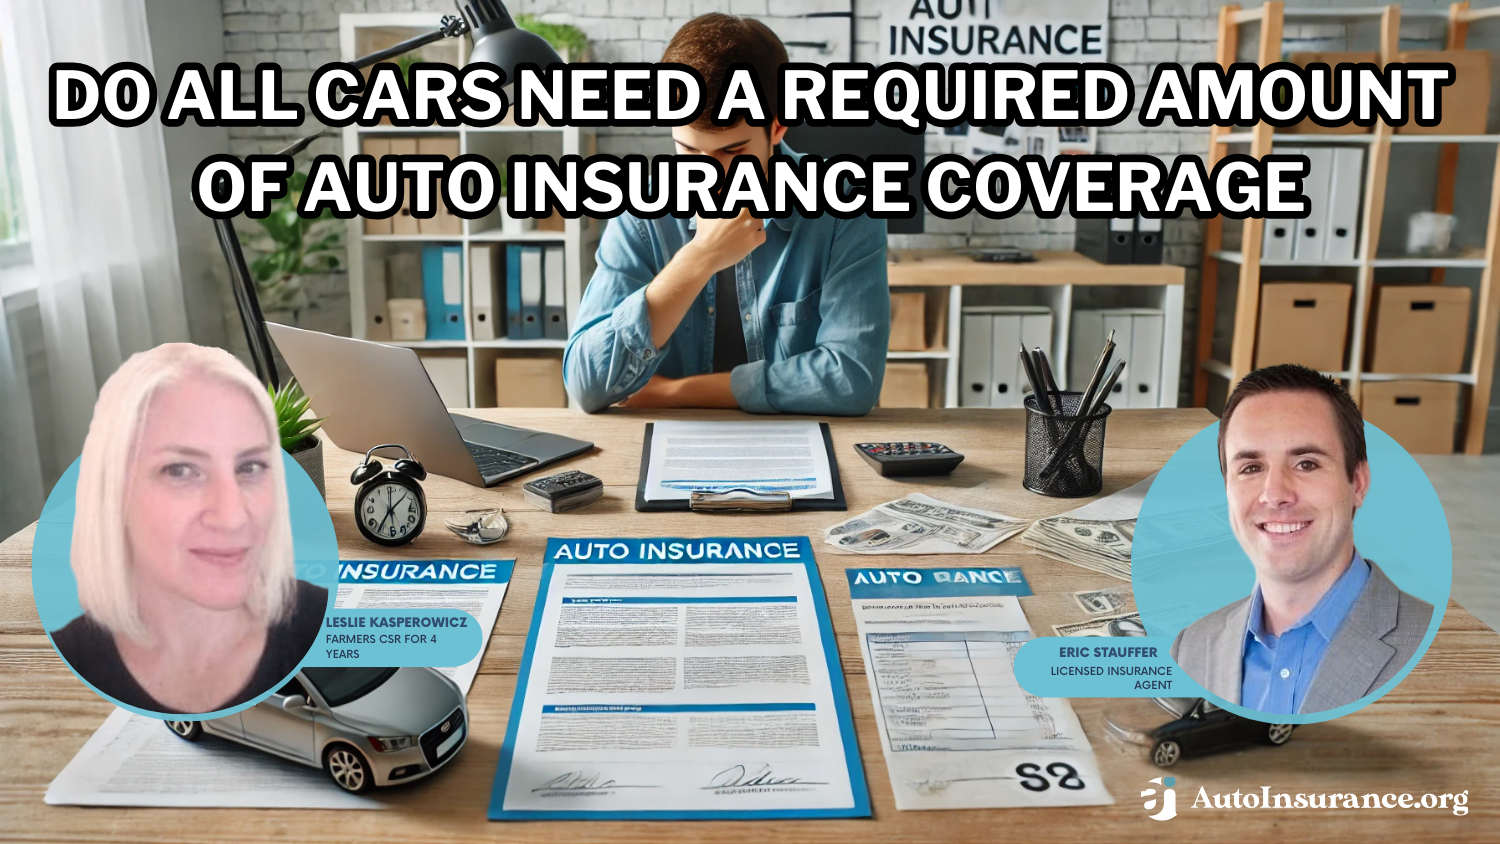 Do all cars need a required amount of auto insurance coverage?